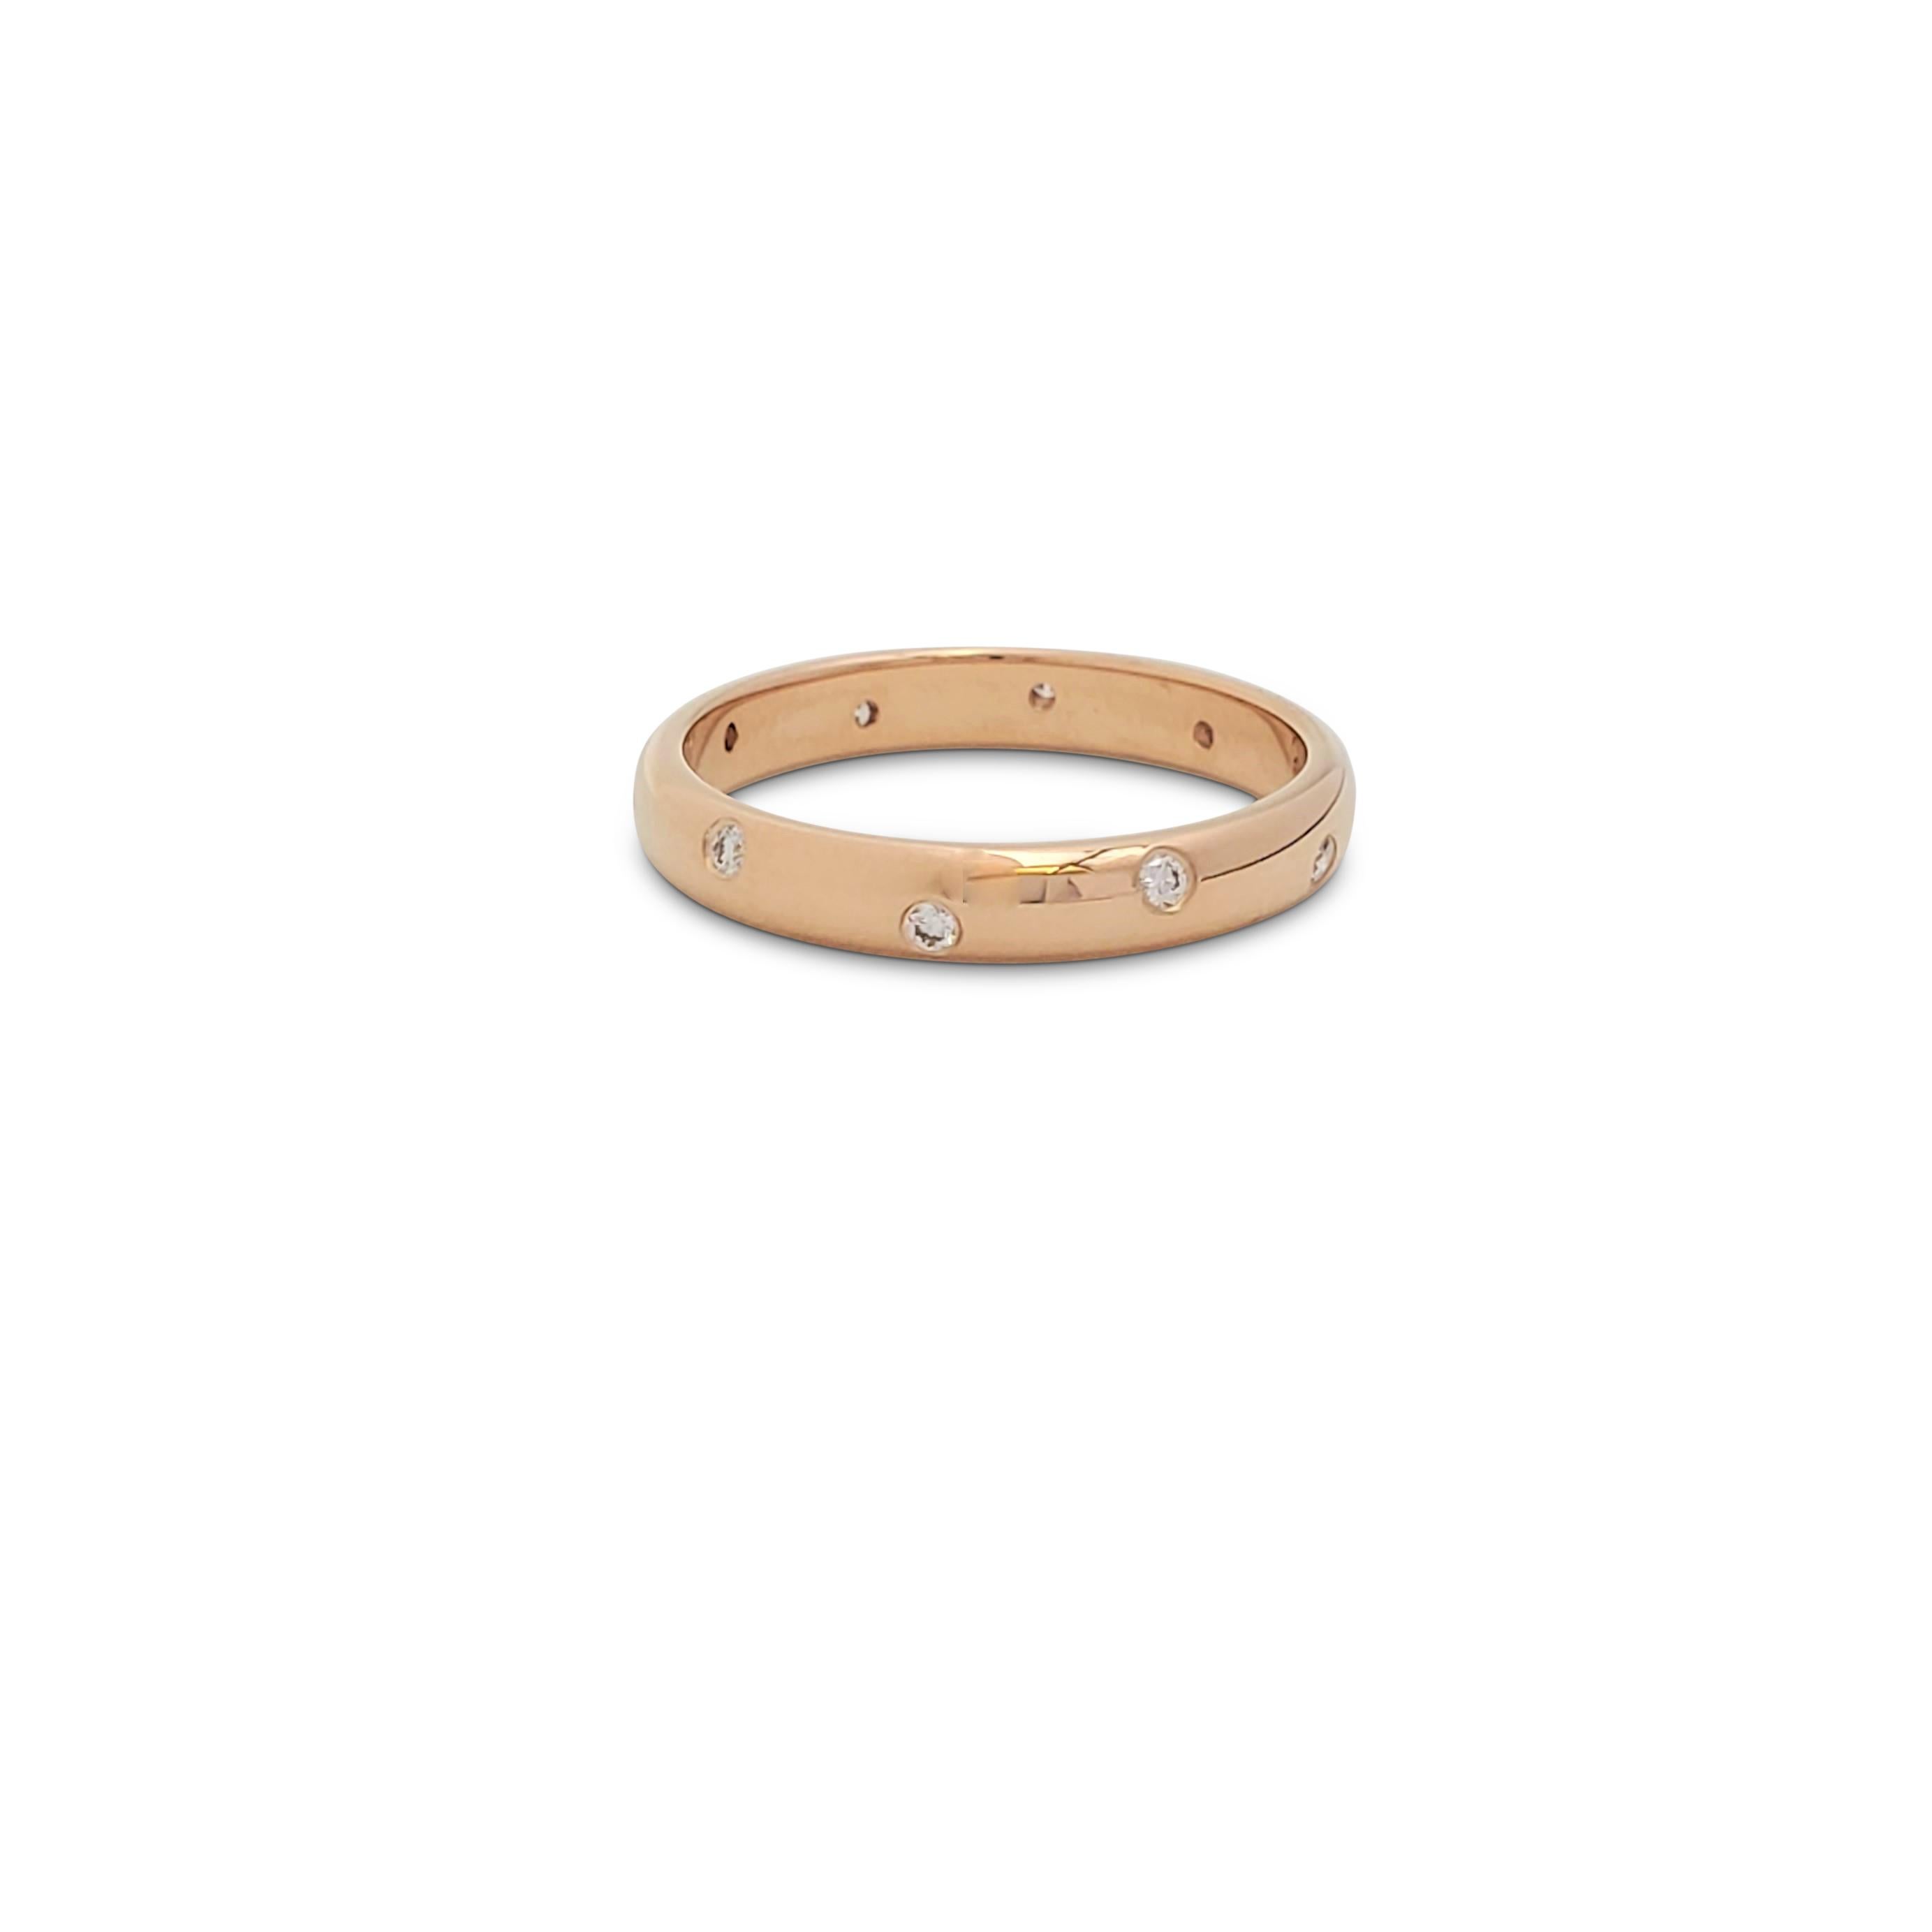 Authentic Tiffany & Co. 'Etoile' band ring crafted in 18 karat rose gold features bezel set round brilliant cut diamonds weighing an estimated 0.13 carats total weight (E-F, VS). Ring size 6. Signed T&Co., Au750. The ring is presented with the